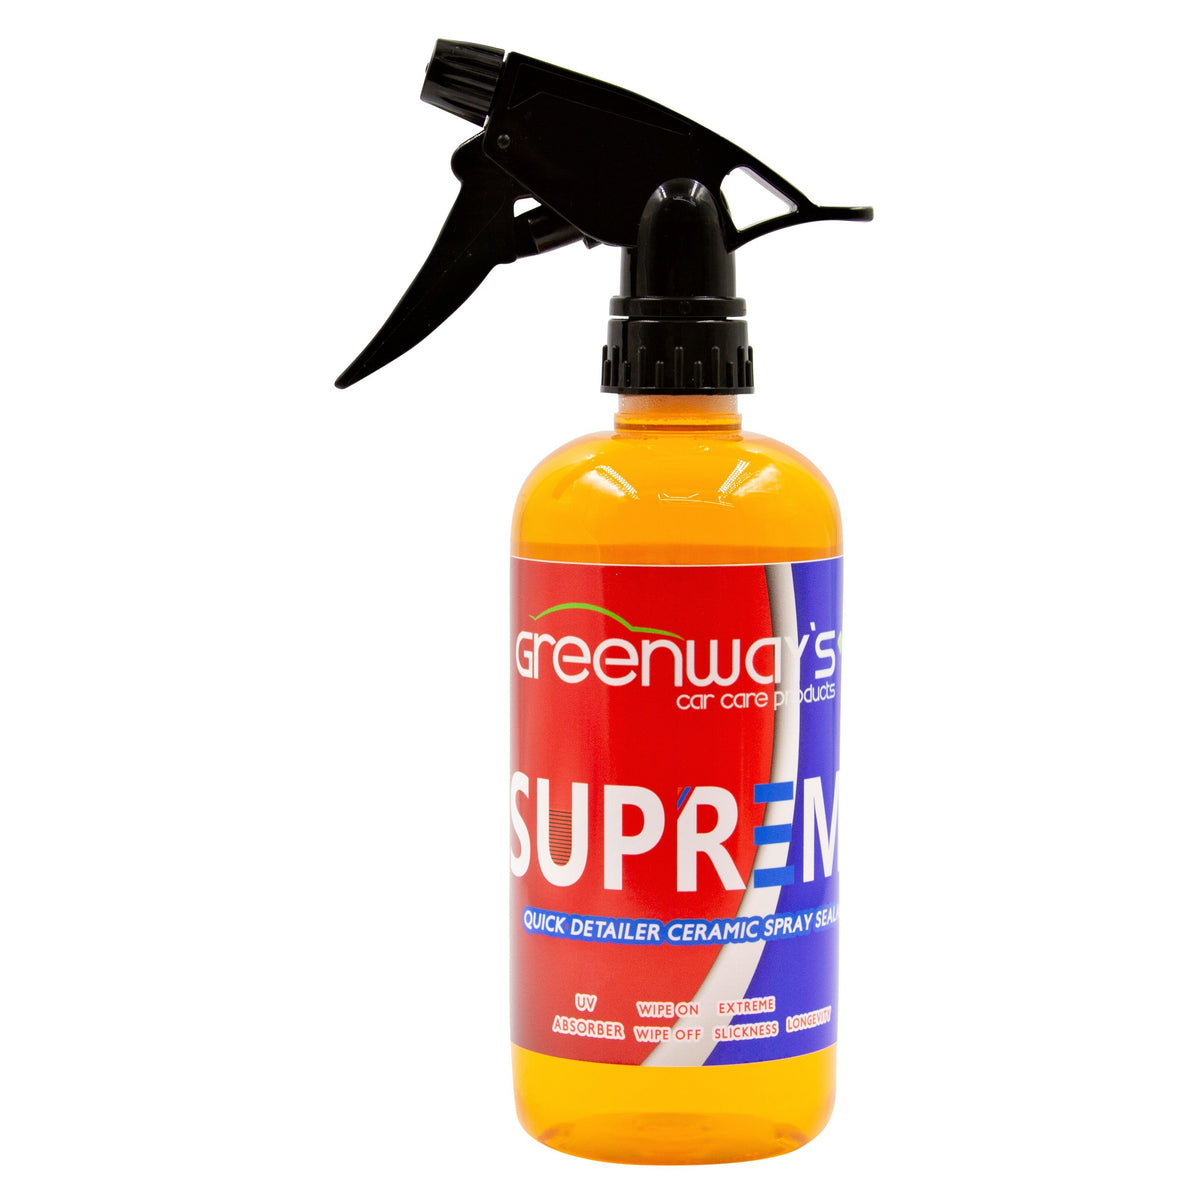 Greenway's Wipe Away Detailer Spray – Greenway's Car Care Products